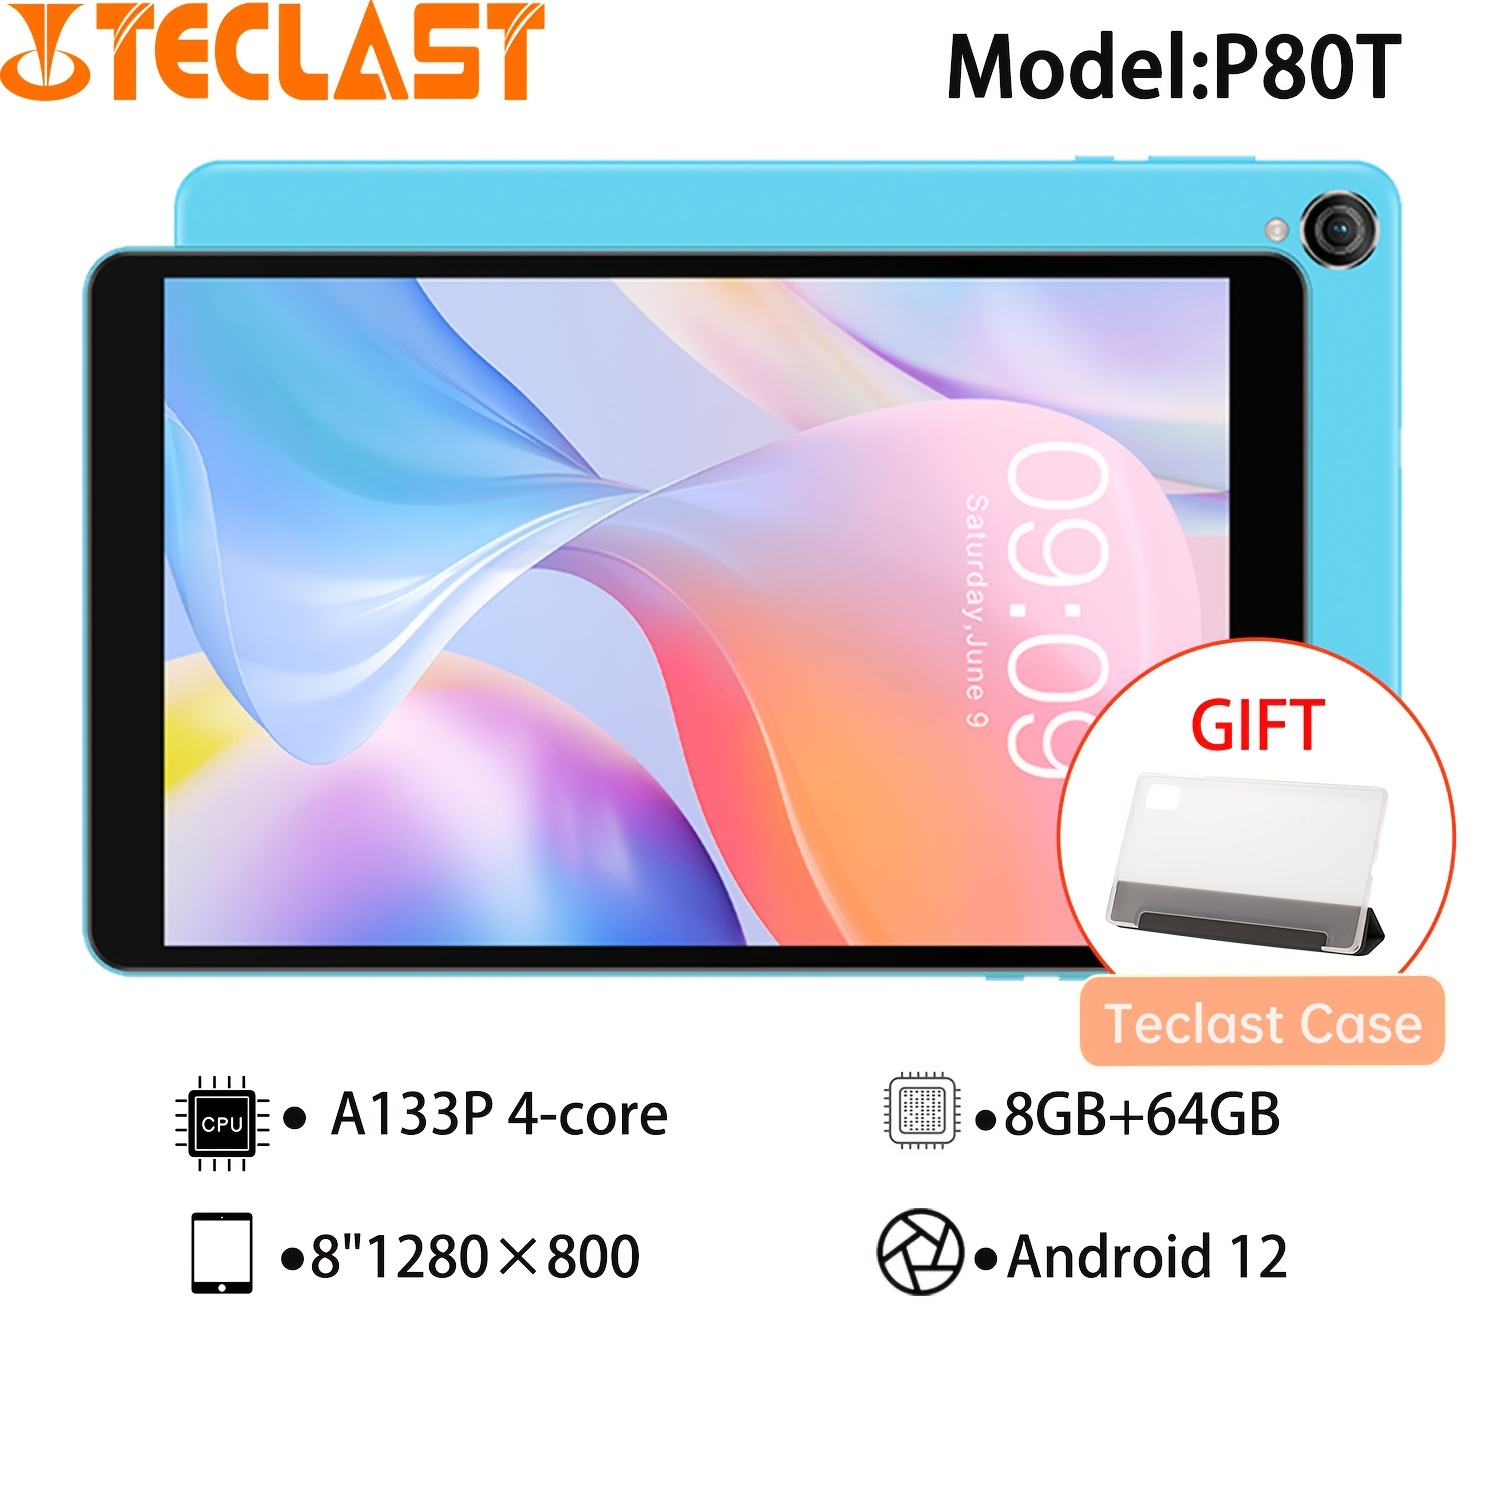 The Teclast P80T Pro 4/128gb tablet with a 8“ screen and GPS support